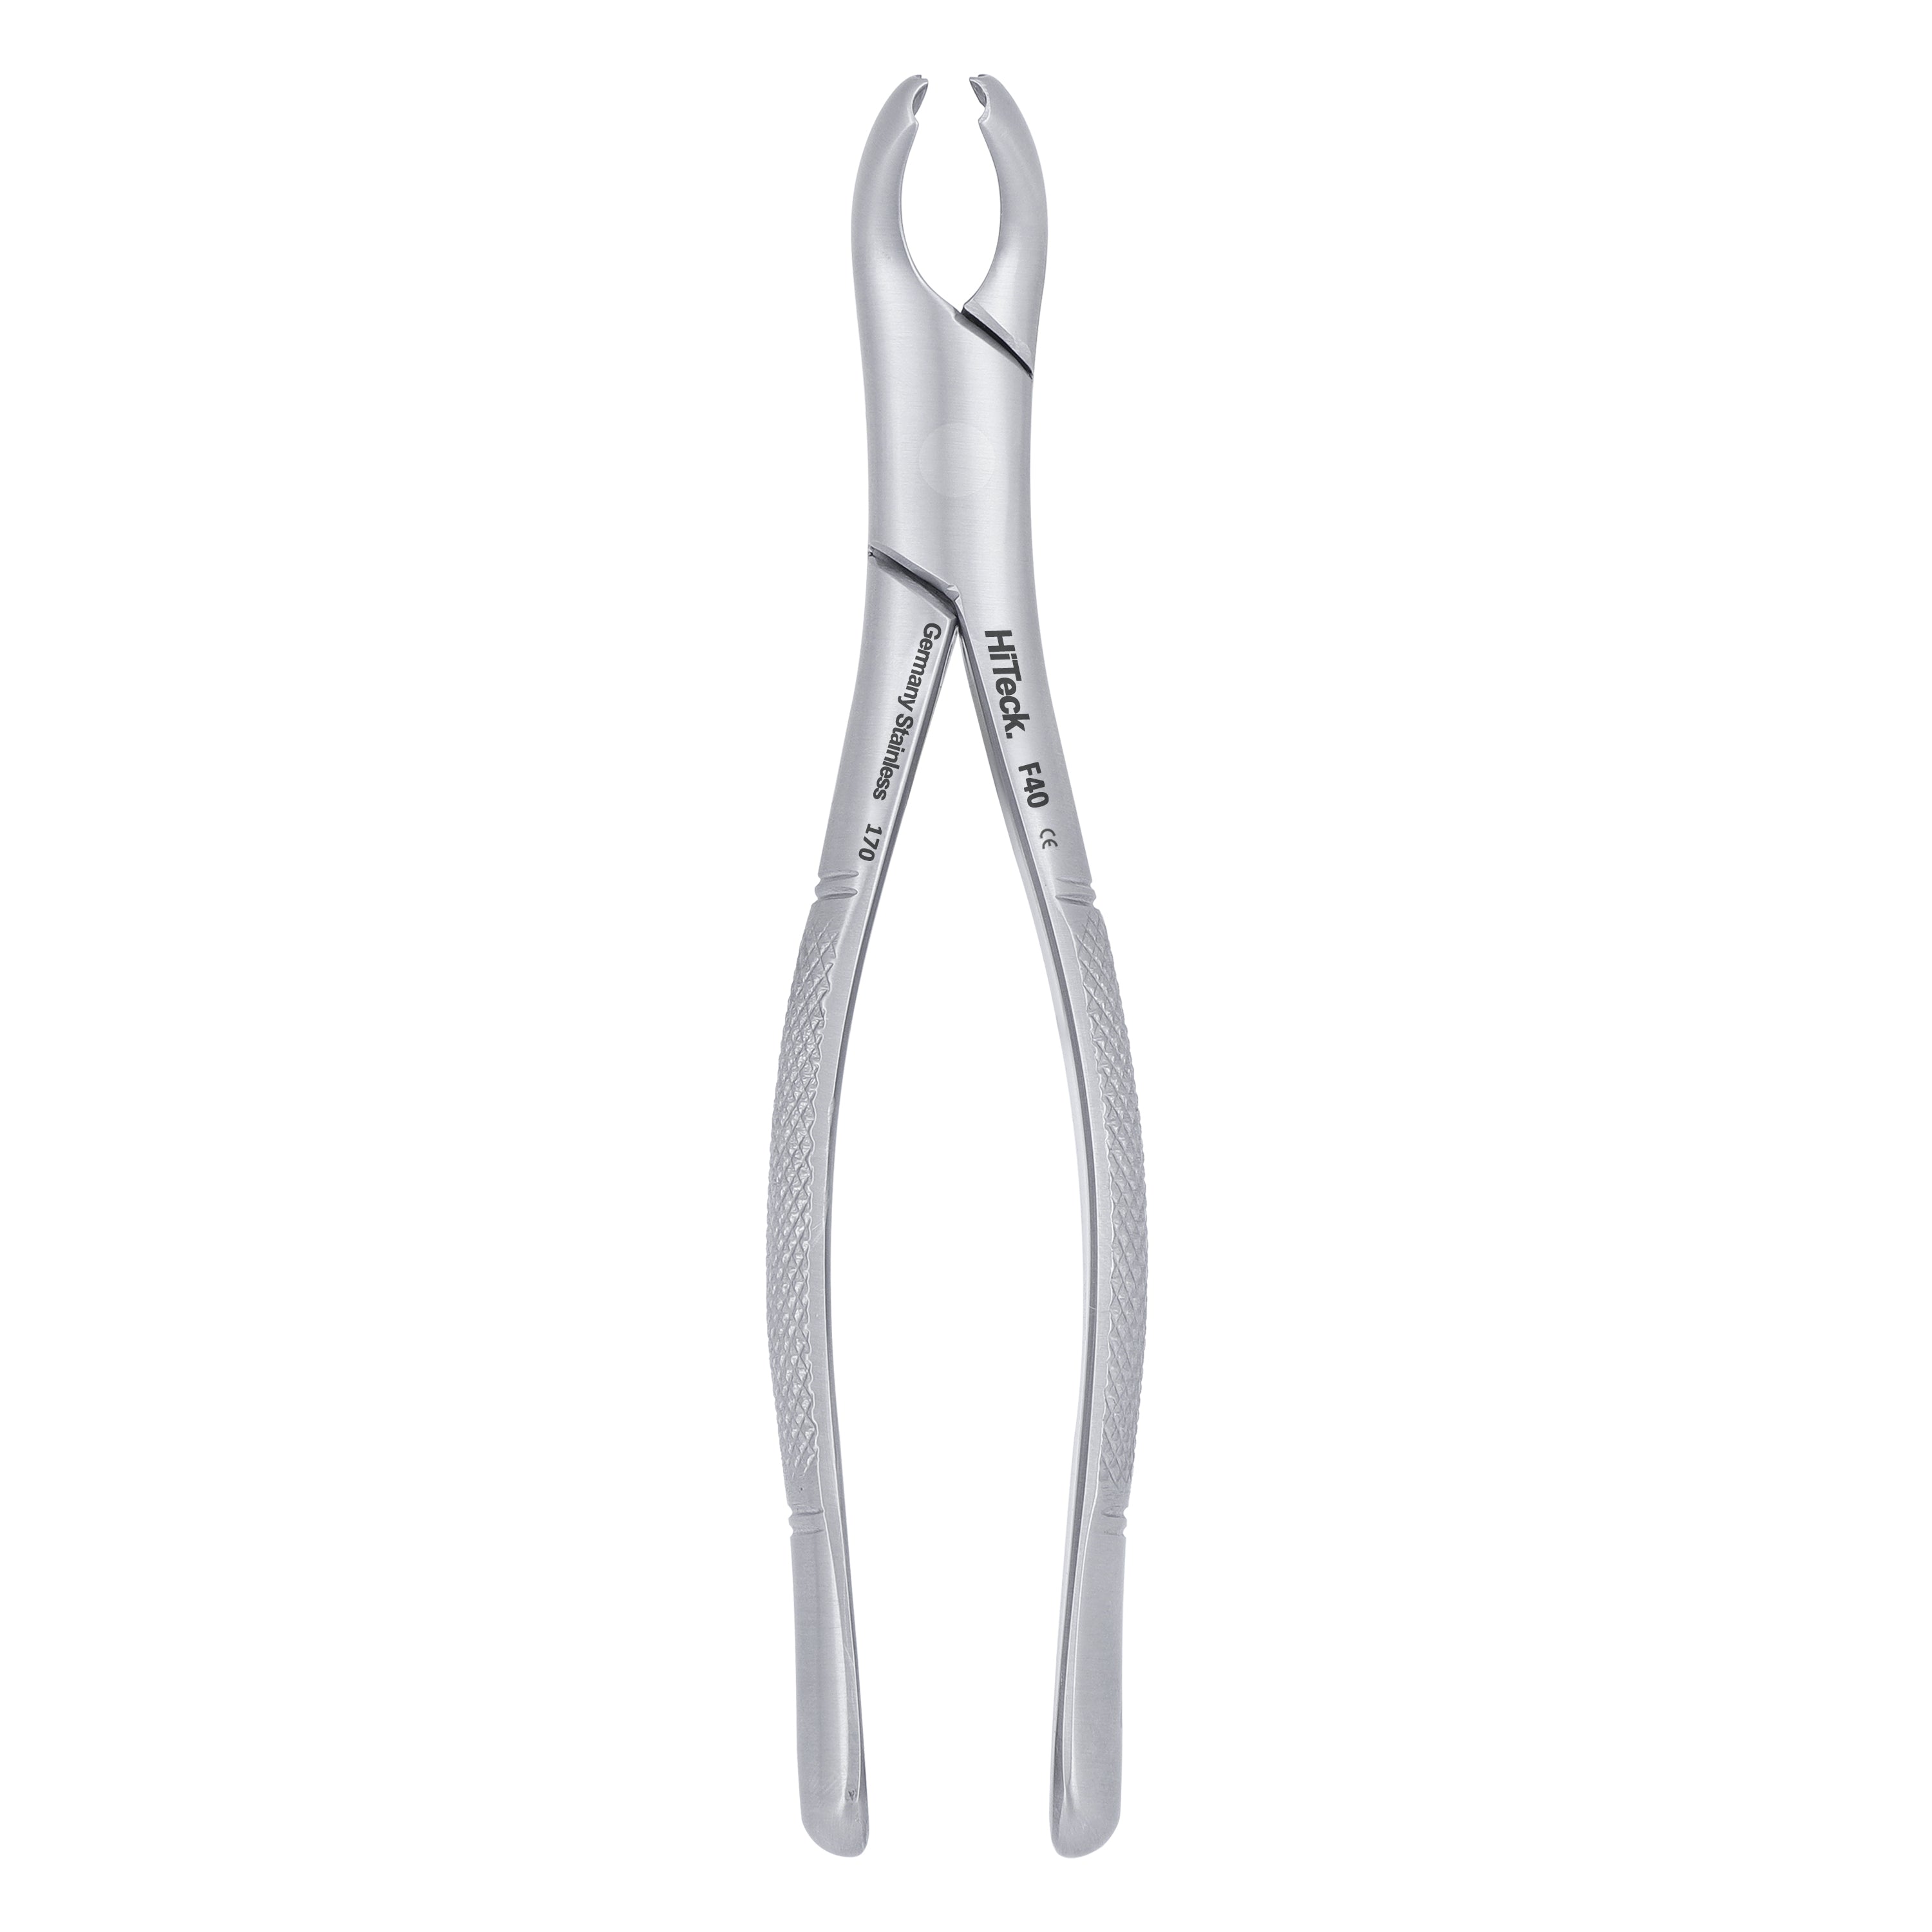 40 Pedo Lower Primary Molars Extraction Forcep - HiTeck Medical Instruments